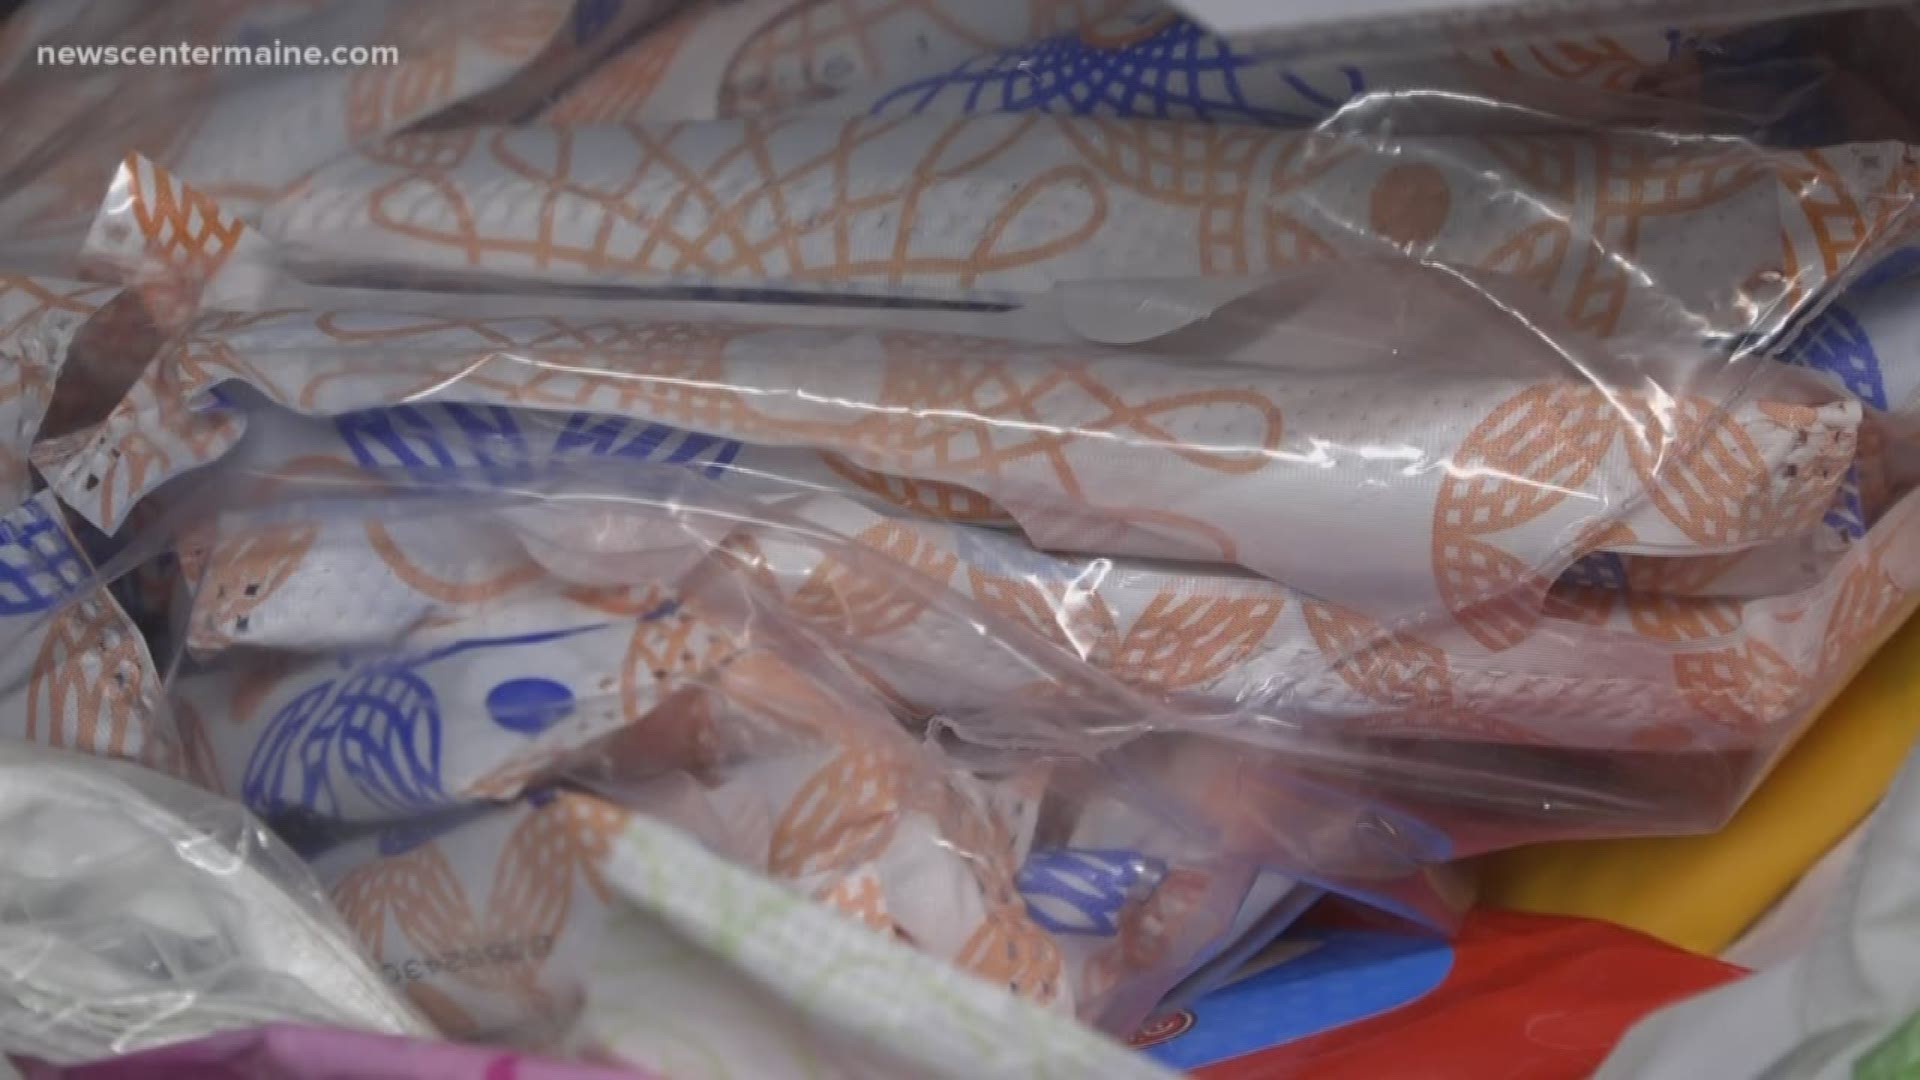 For most women, feminine hygiene products are a monthly necessity.   Most of us go out an buy them when we need them... But they are expensive... And some women really struggle to add that cost to their budgets.  That's why one woman in the Bangor area is collecting personal supplies for women.